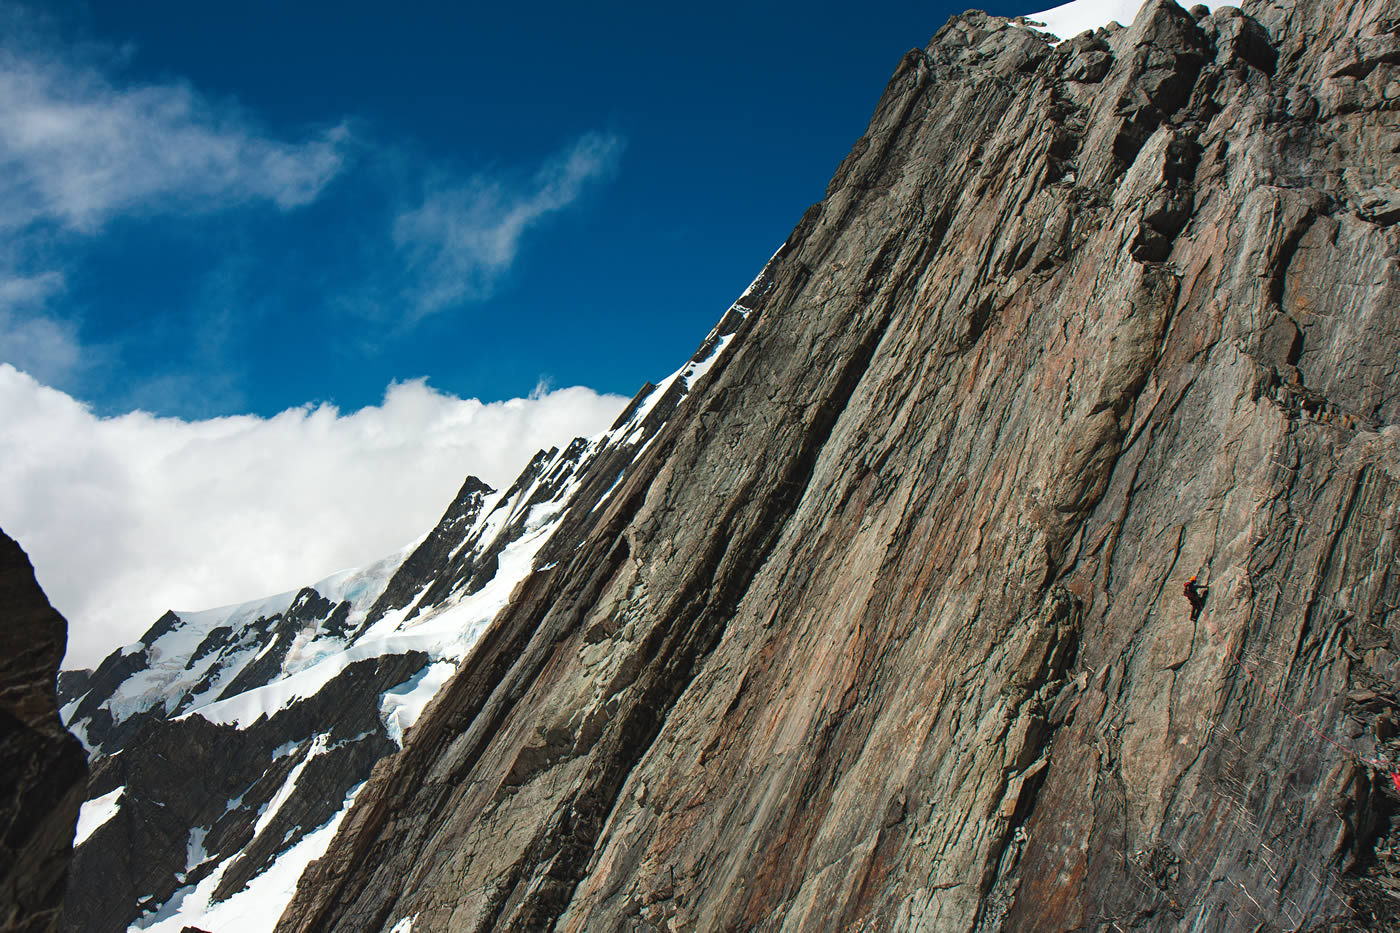 Jamie Vinton-Boot near the end of Stuntman and Chronic (5.9, five pitches) before the West Rib (5.8, eight pitches) of Mt. Walter. In the background is the West Ridge of Elie de Beaumont. [Photo] Kester Brown